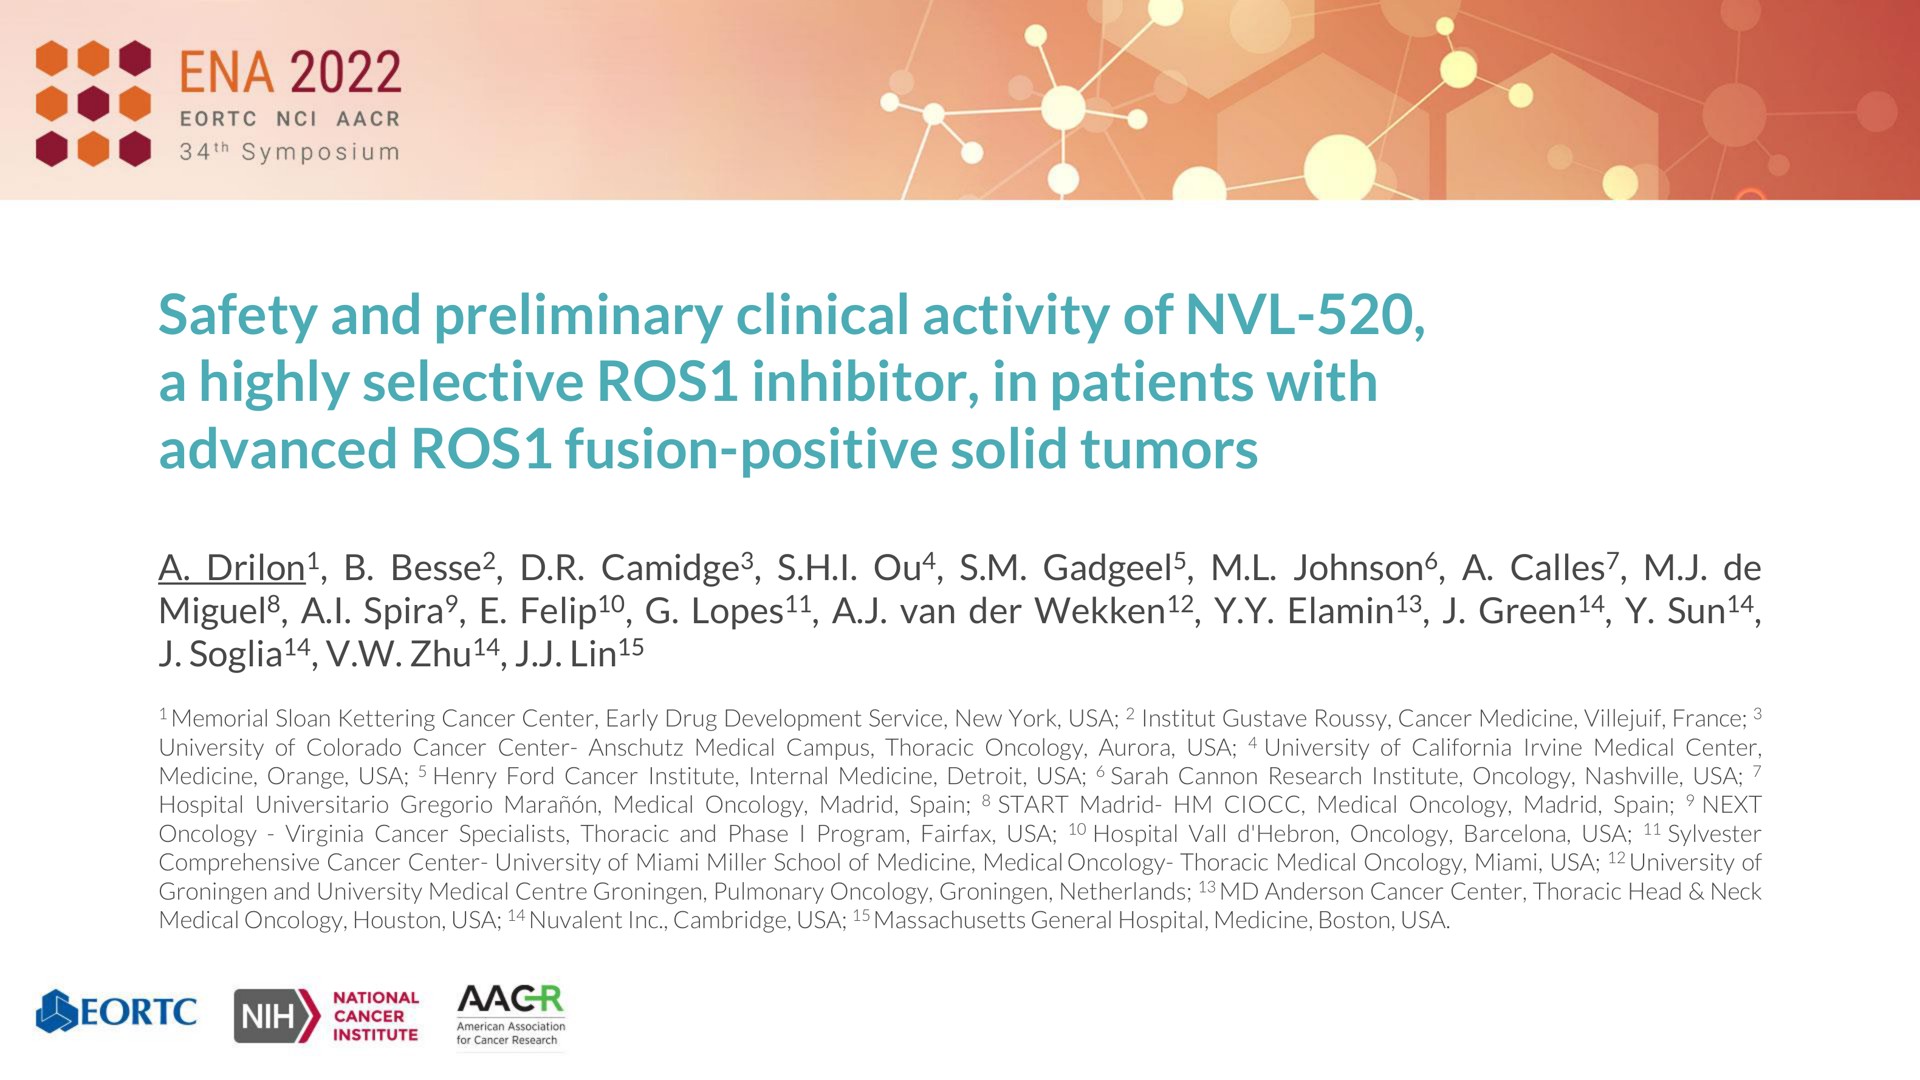 safety and preliminary clinical activity of a highly selective inhibitor in patients with advanced fusion positive solid tumors cine | Nuvalent